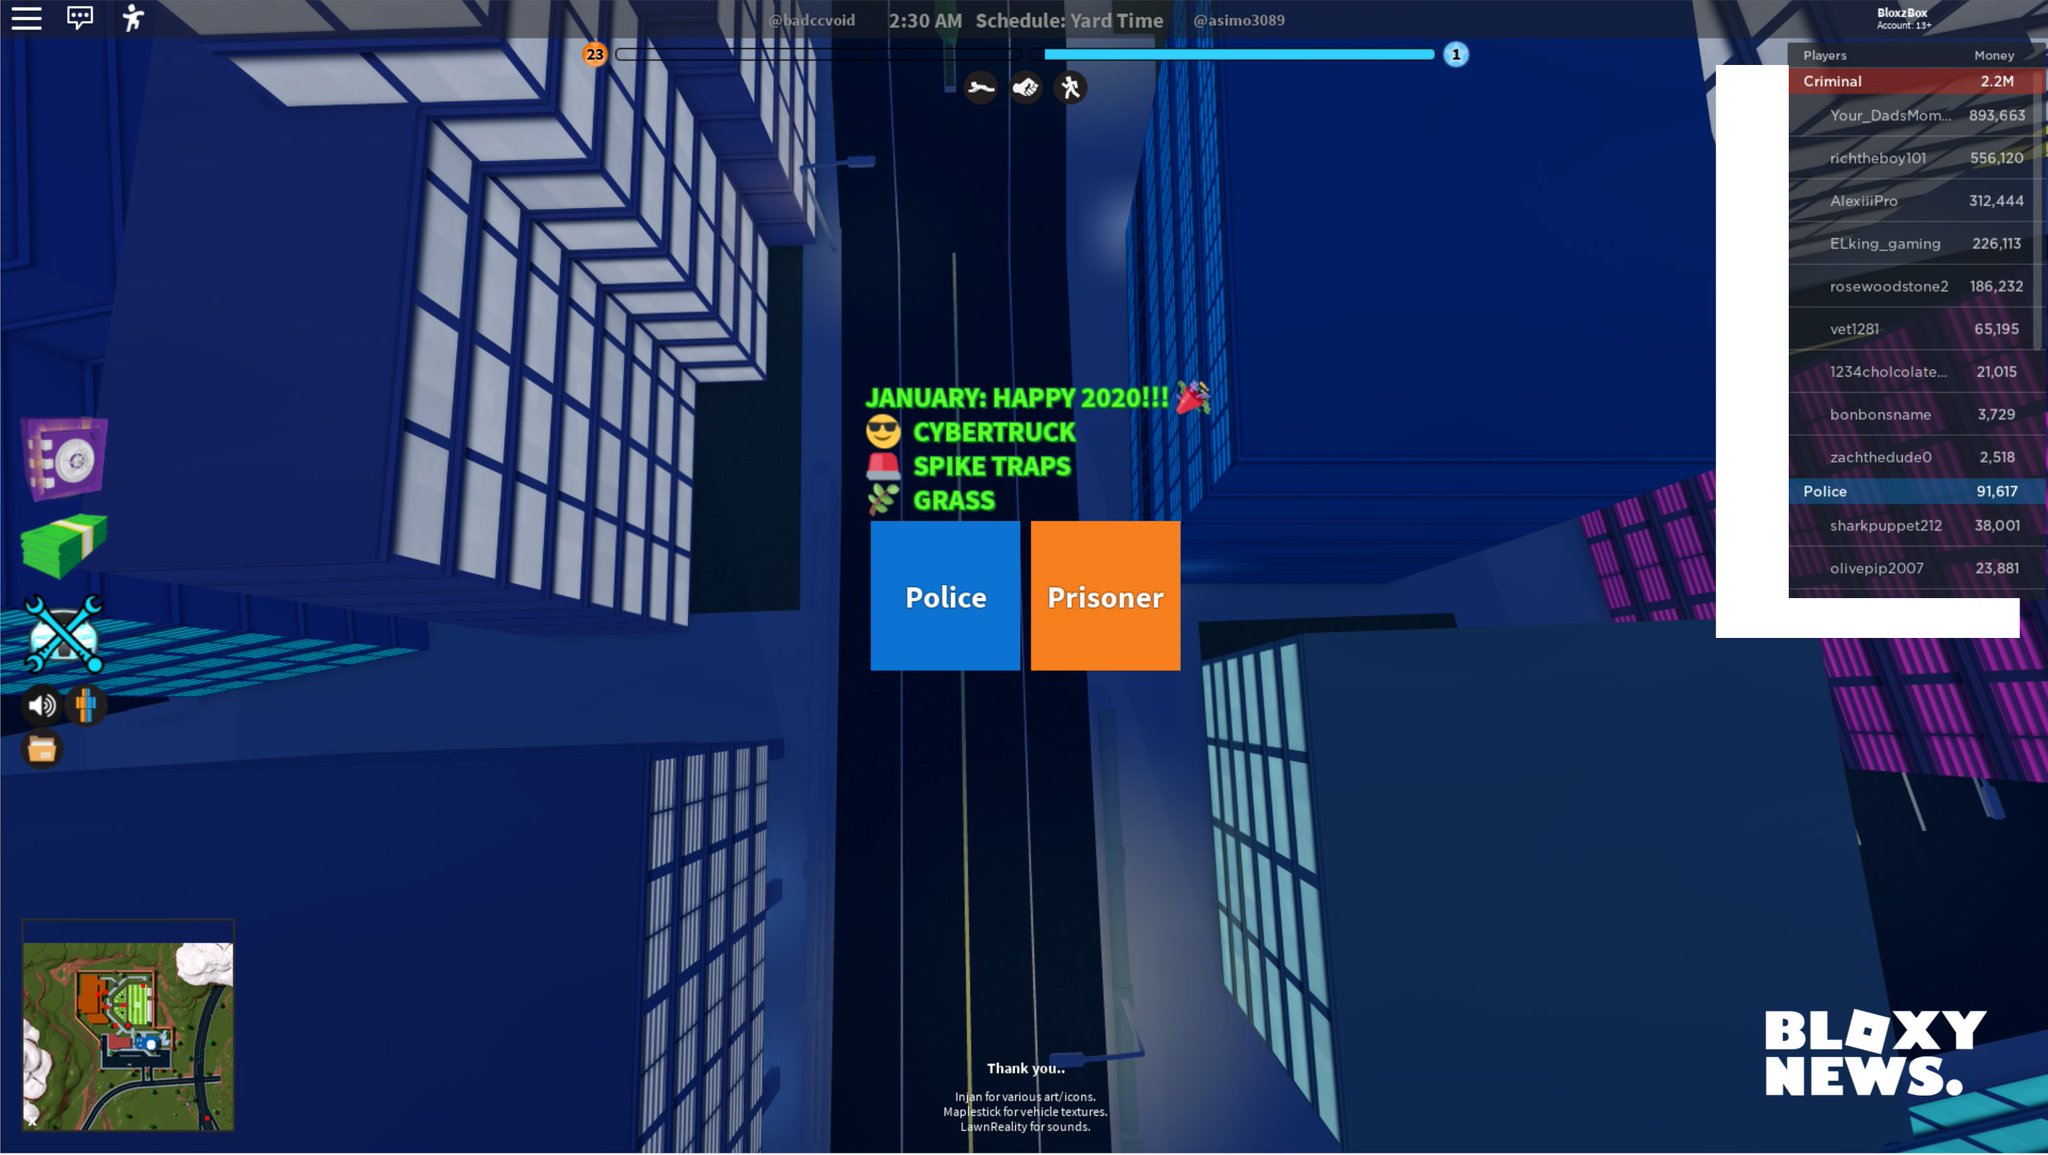 Bloxy News On Twitter The Roblox Leaderboard Has Been Updated Once Again Based On User Feedback The New Leaderboard Is Now Smaller And Takes Up Less Of The Screen The White Box - roblox old leaderboard